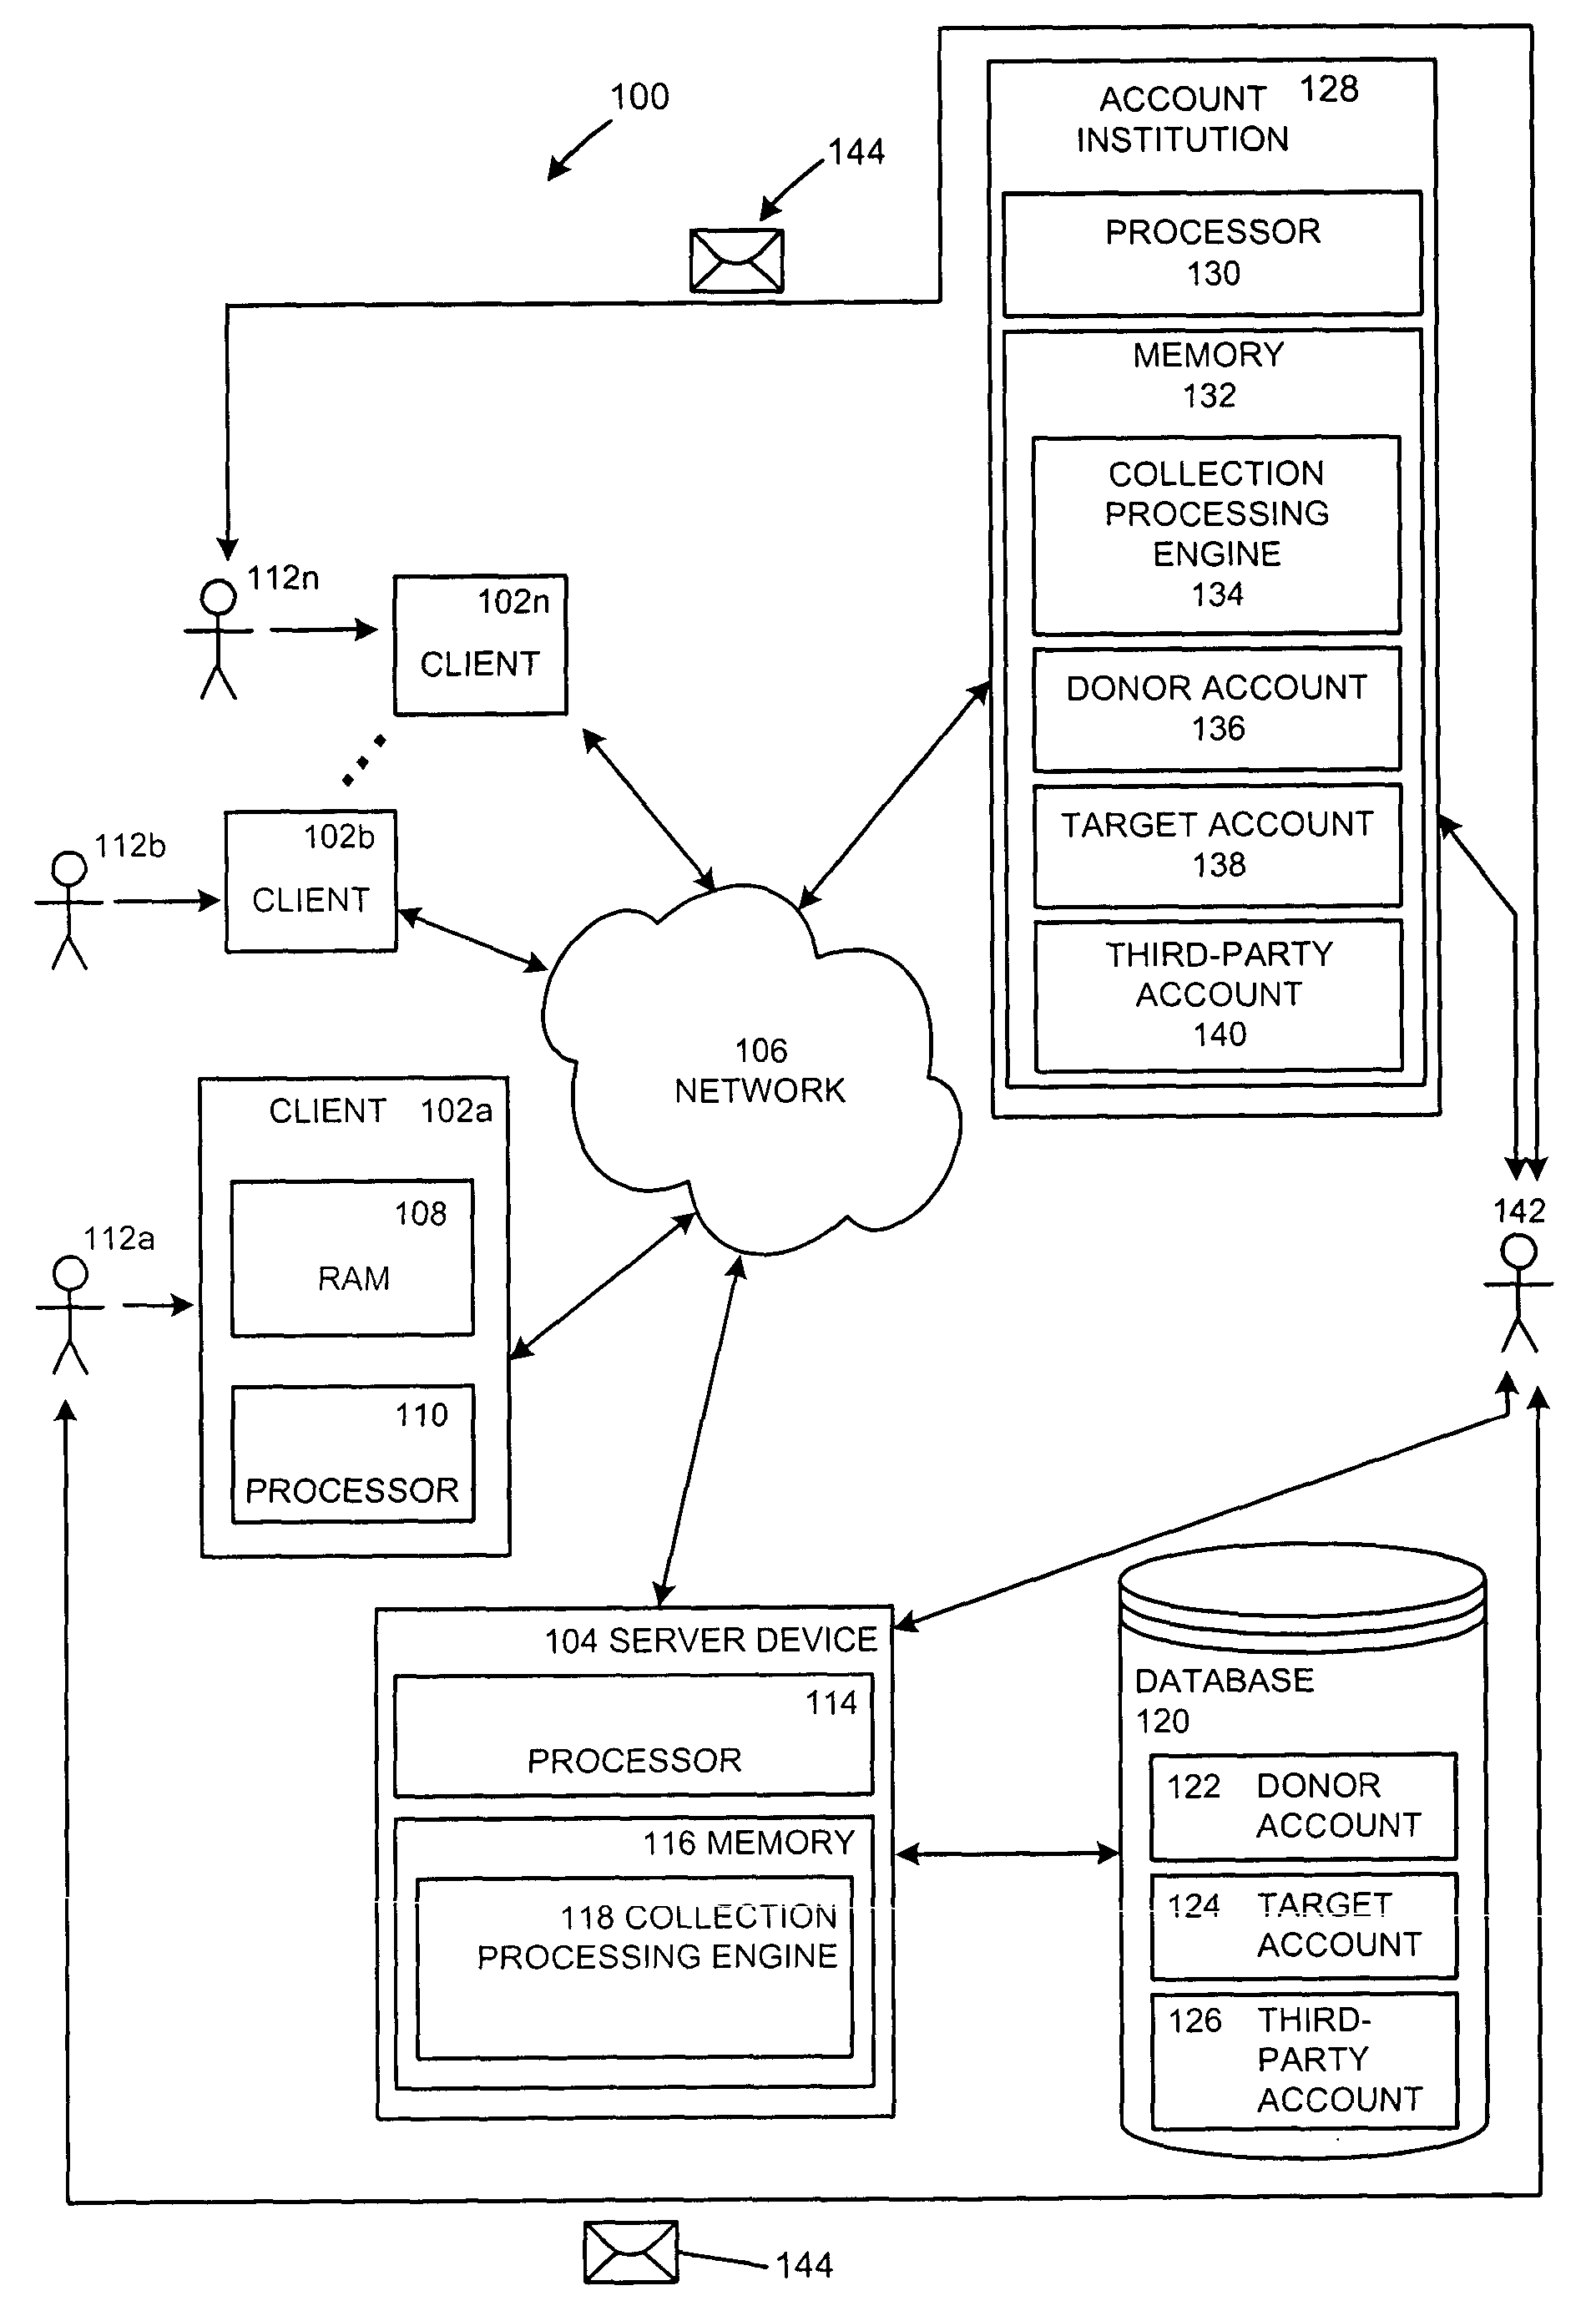 Methods and systems for automatically determining and collecting a monetary contribution from an instrument